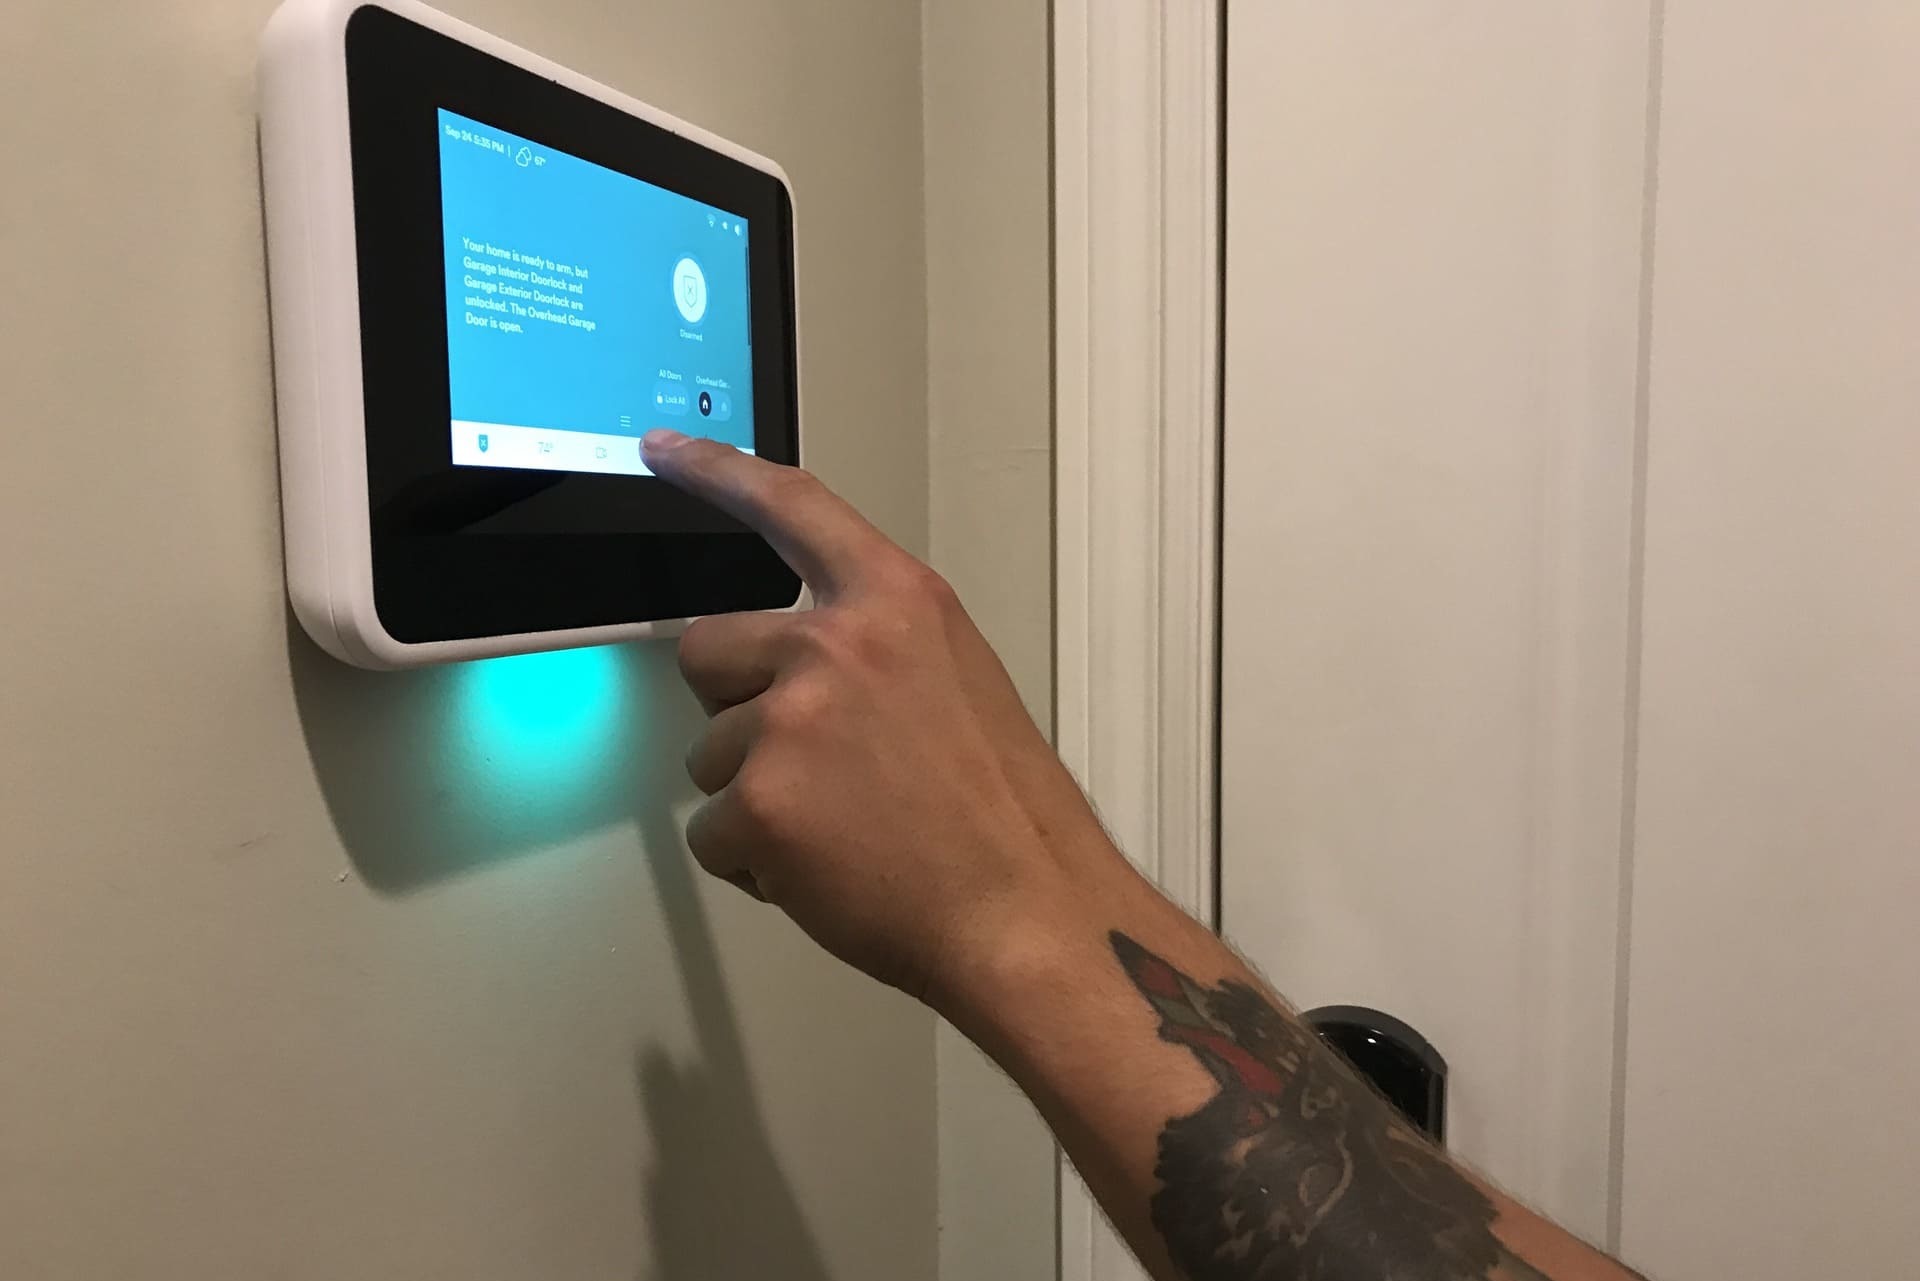 A Technician gives instructions on Programming the home security panel in a smart home.